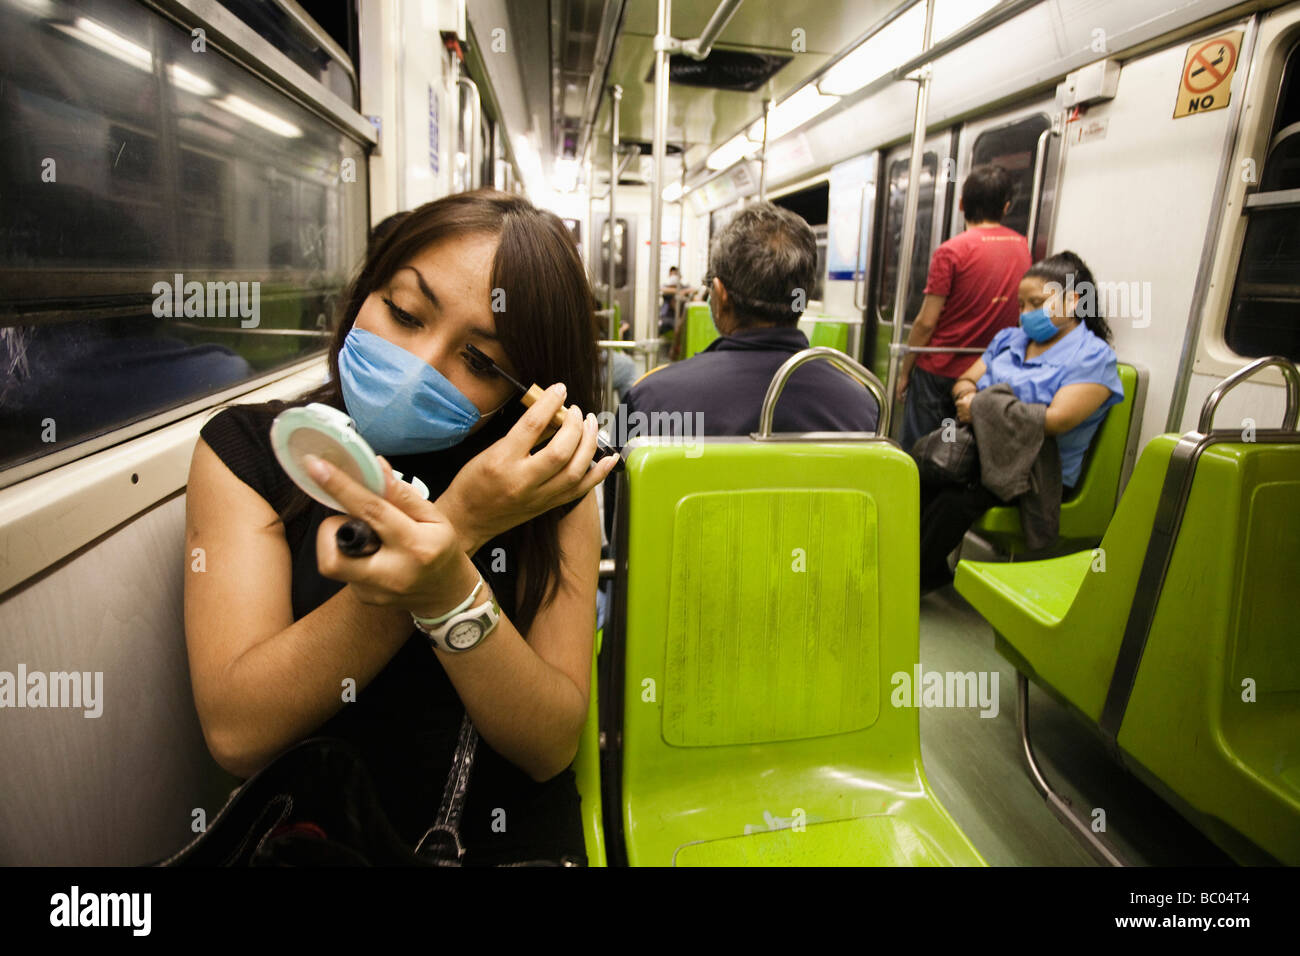 A woman wearing a mask puts on make up in the subway during the swine flu epidemic in Mexico City, DF, Mexico. Stock Photo